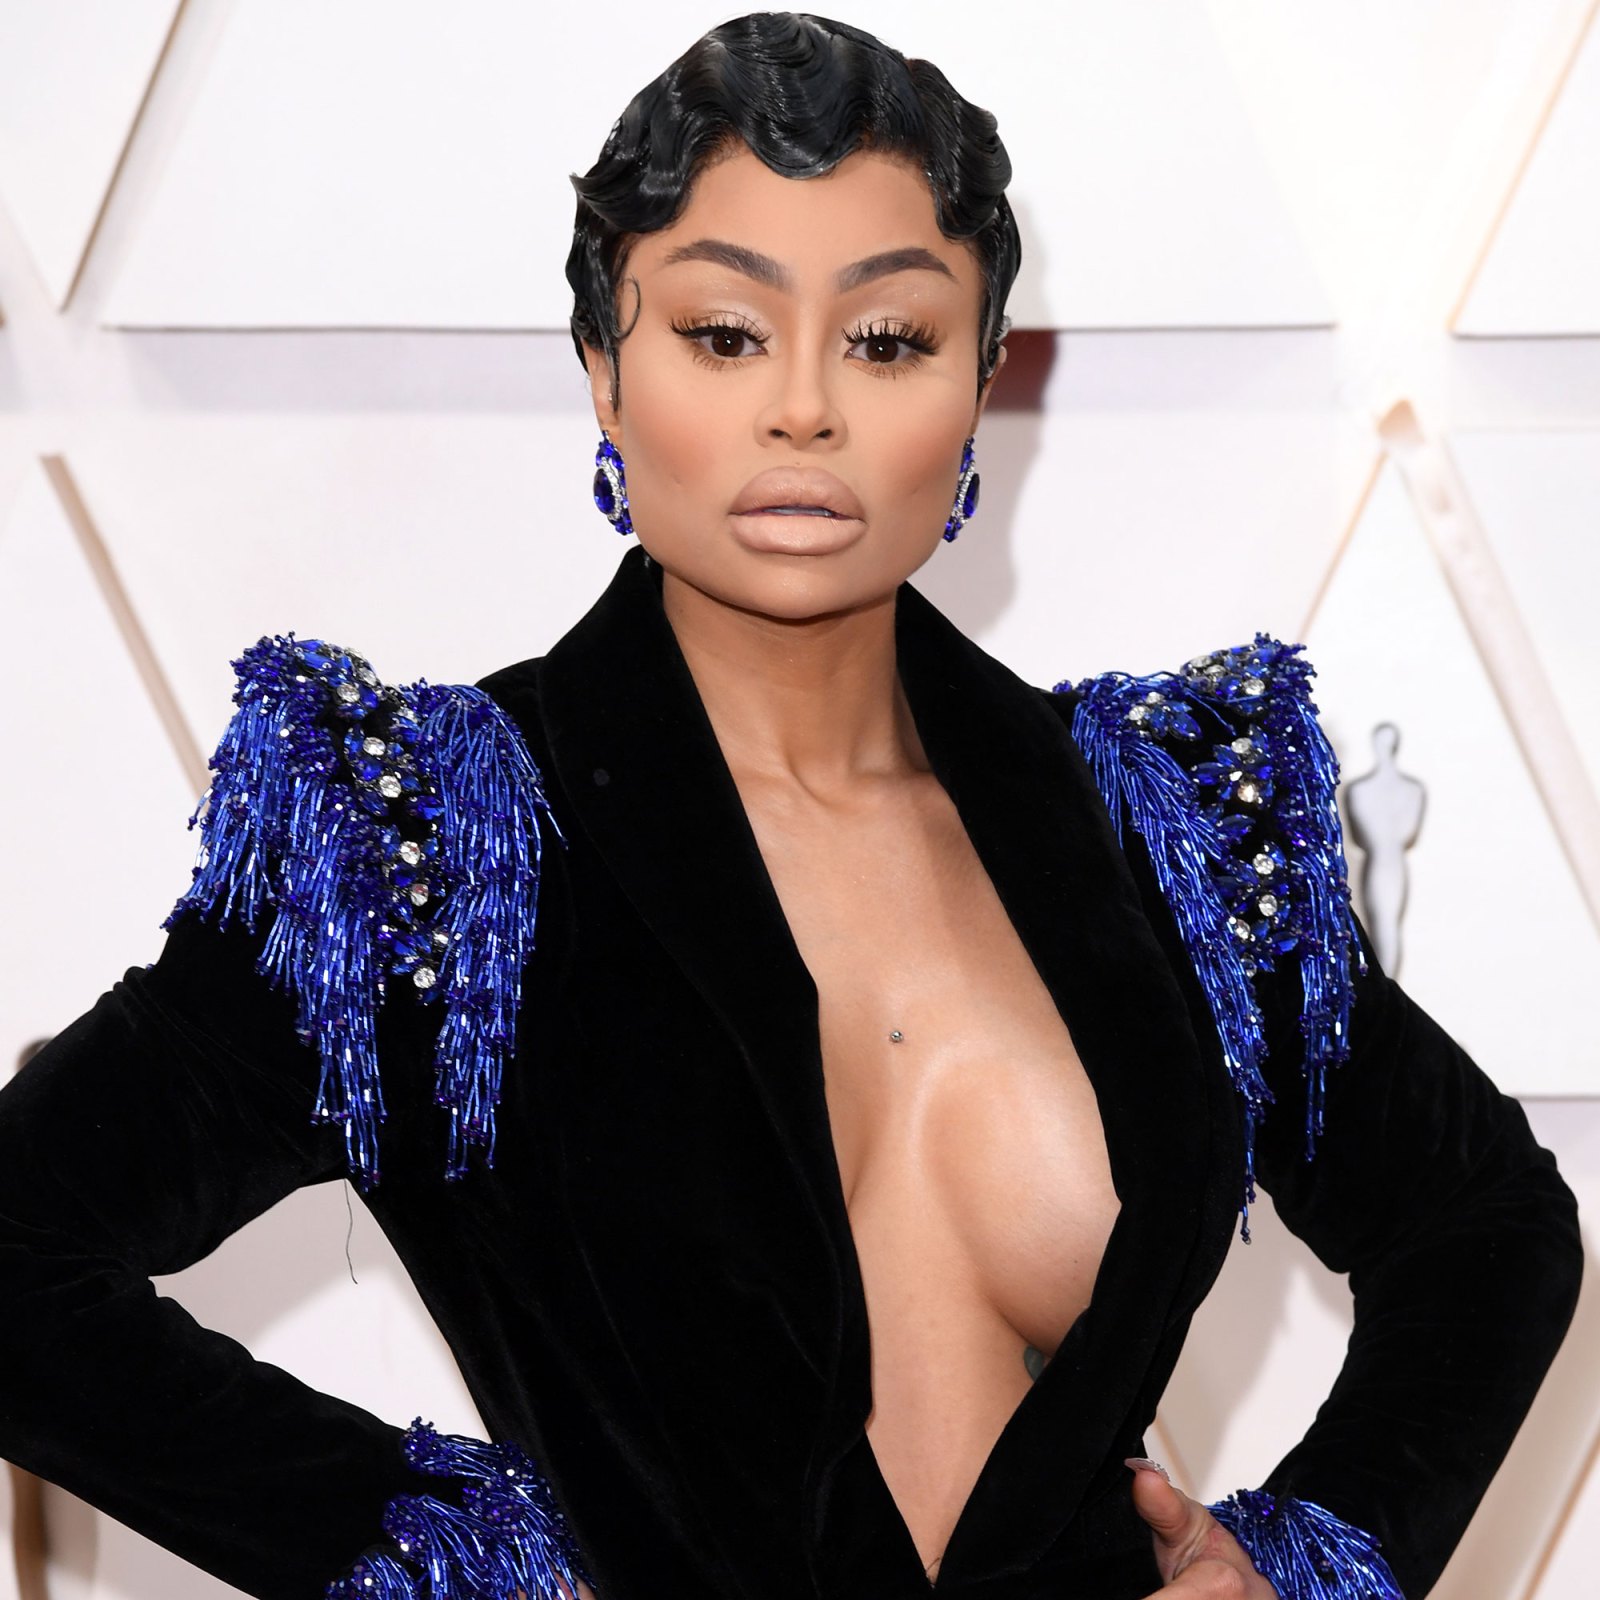 Everything Said About Blac Chyna's Defamation Lawsuit on 'The Kardashians': 'It's Really Draining'